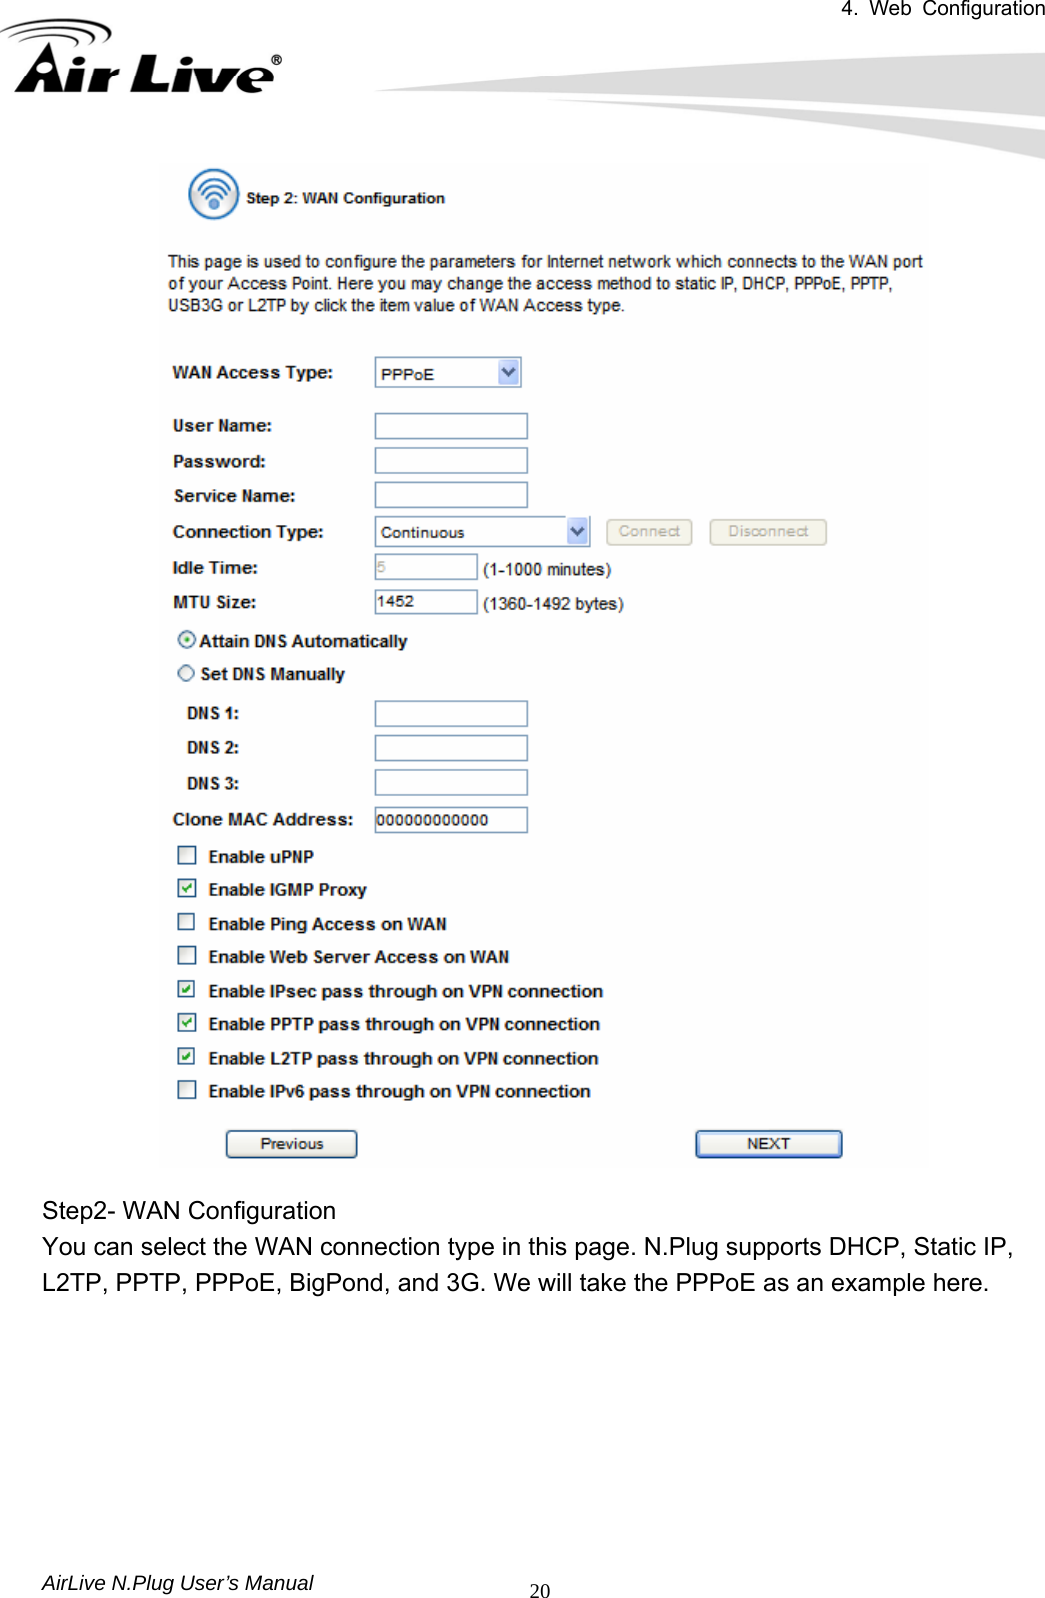 4. Web Configuration       AirLive N.Plug User’s Manual  20  Step2- WAN Configuration You can select the WAN connection type in this page. N.Plug supports DHCP, Static IP, L2TP, PPTP, PPPoE, BigPond, and 3G. We will take the PPPoE as an example here.        